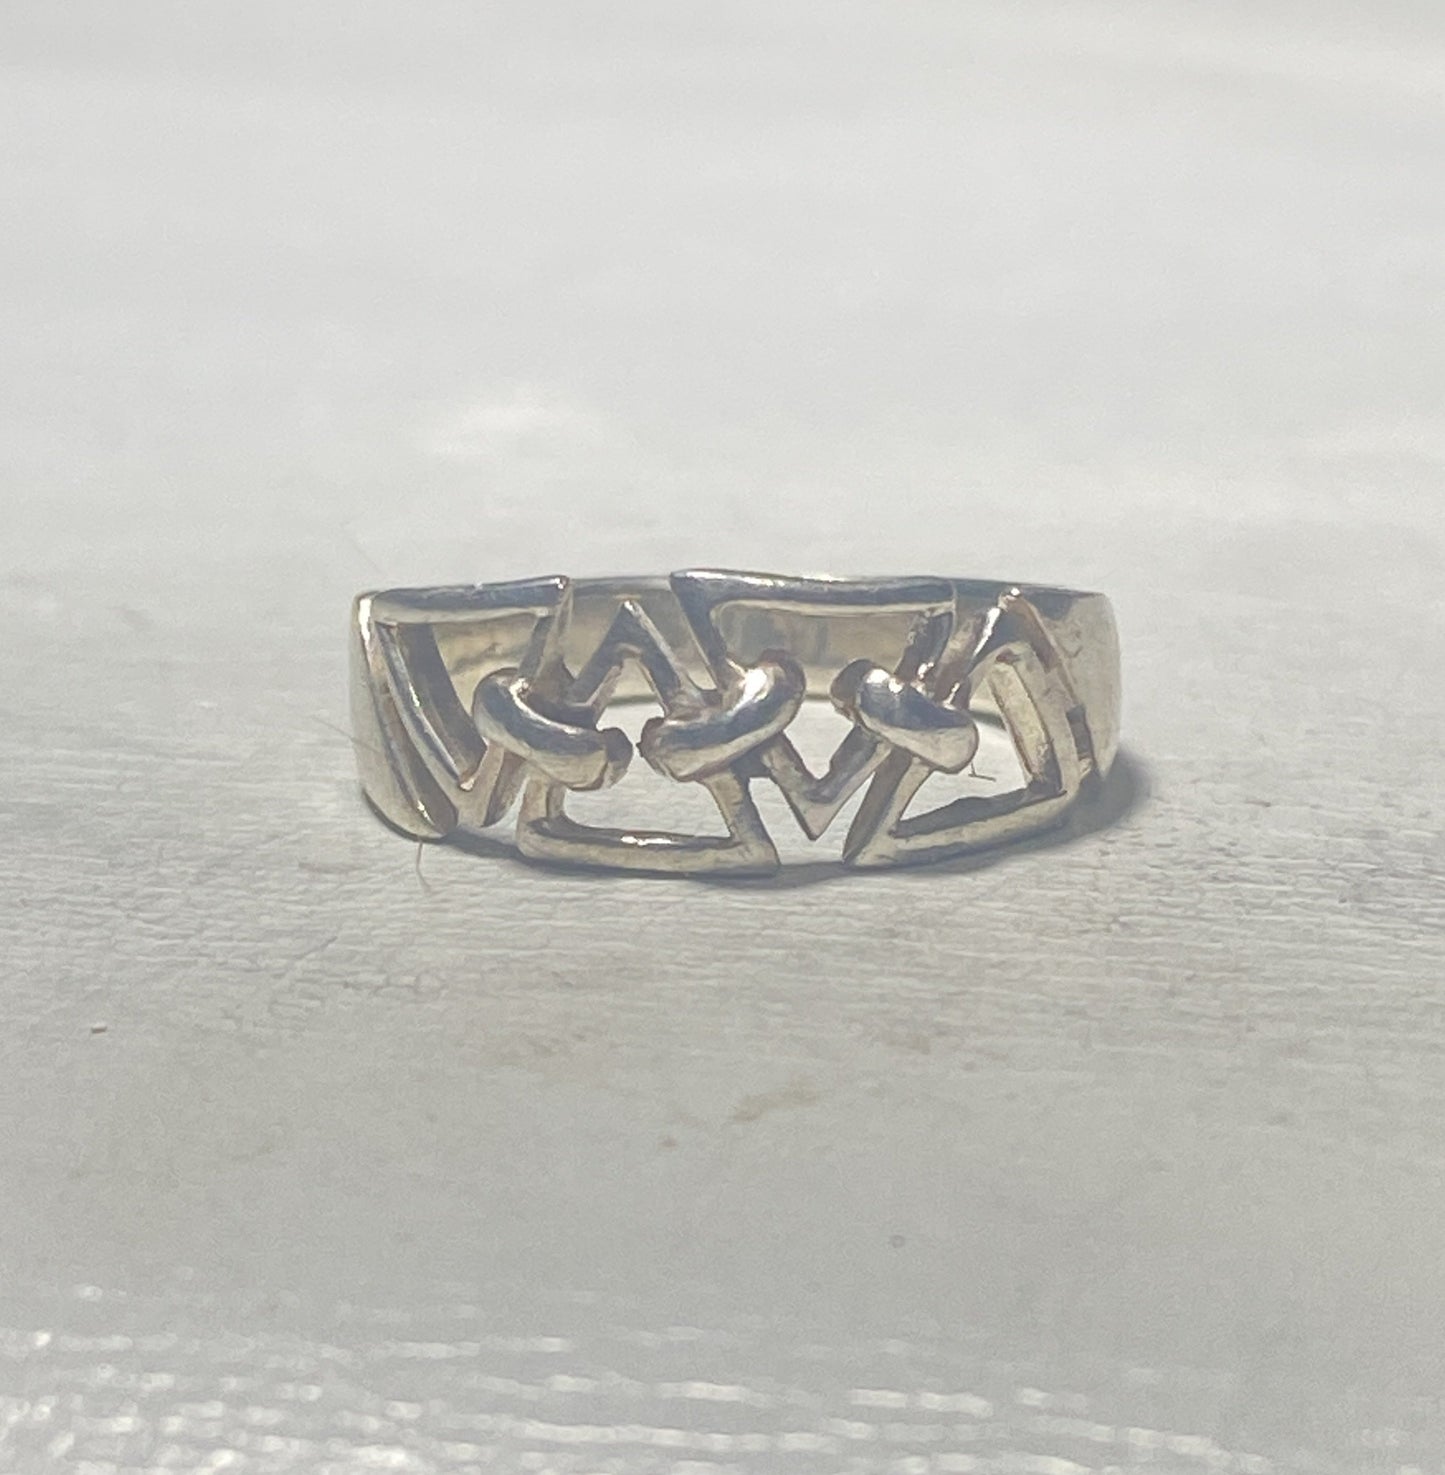 Geometric ring triangles band sterling silver women girls